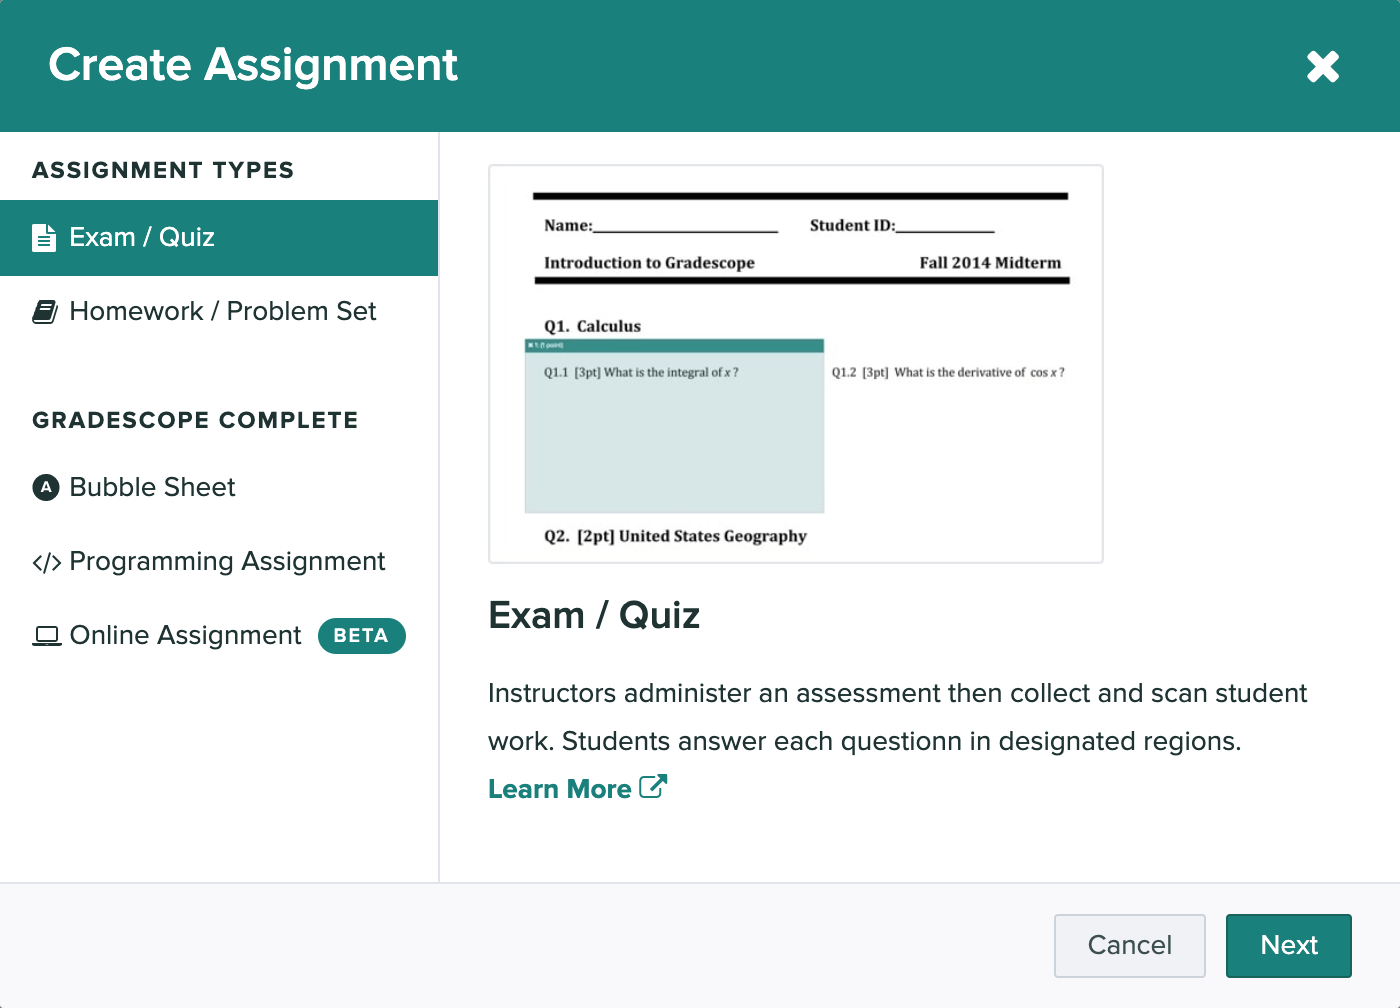 The create assignment modal is open and the exam / quiz option is selected.